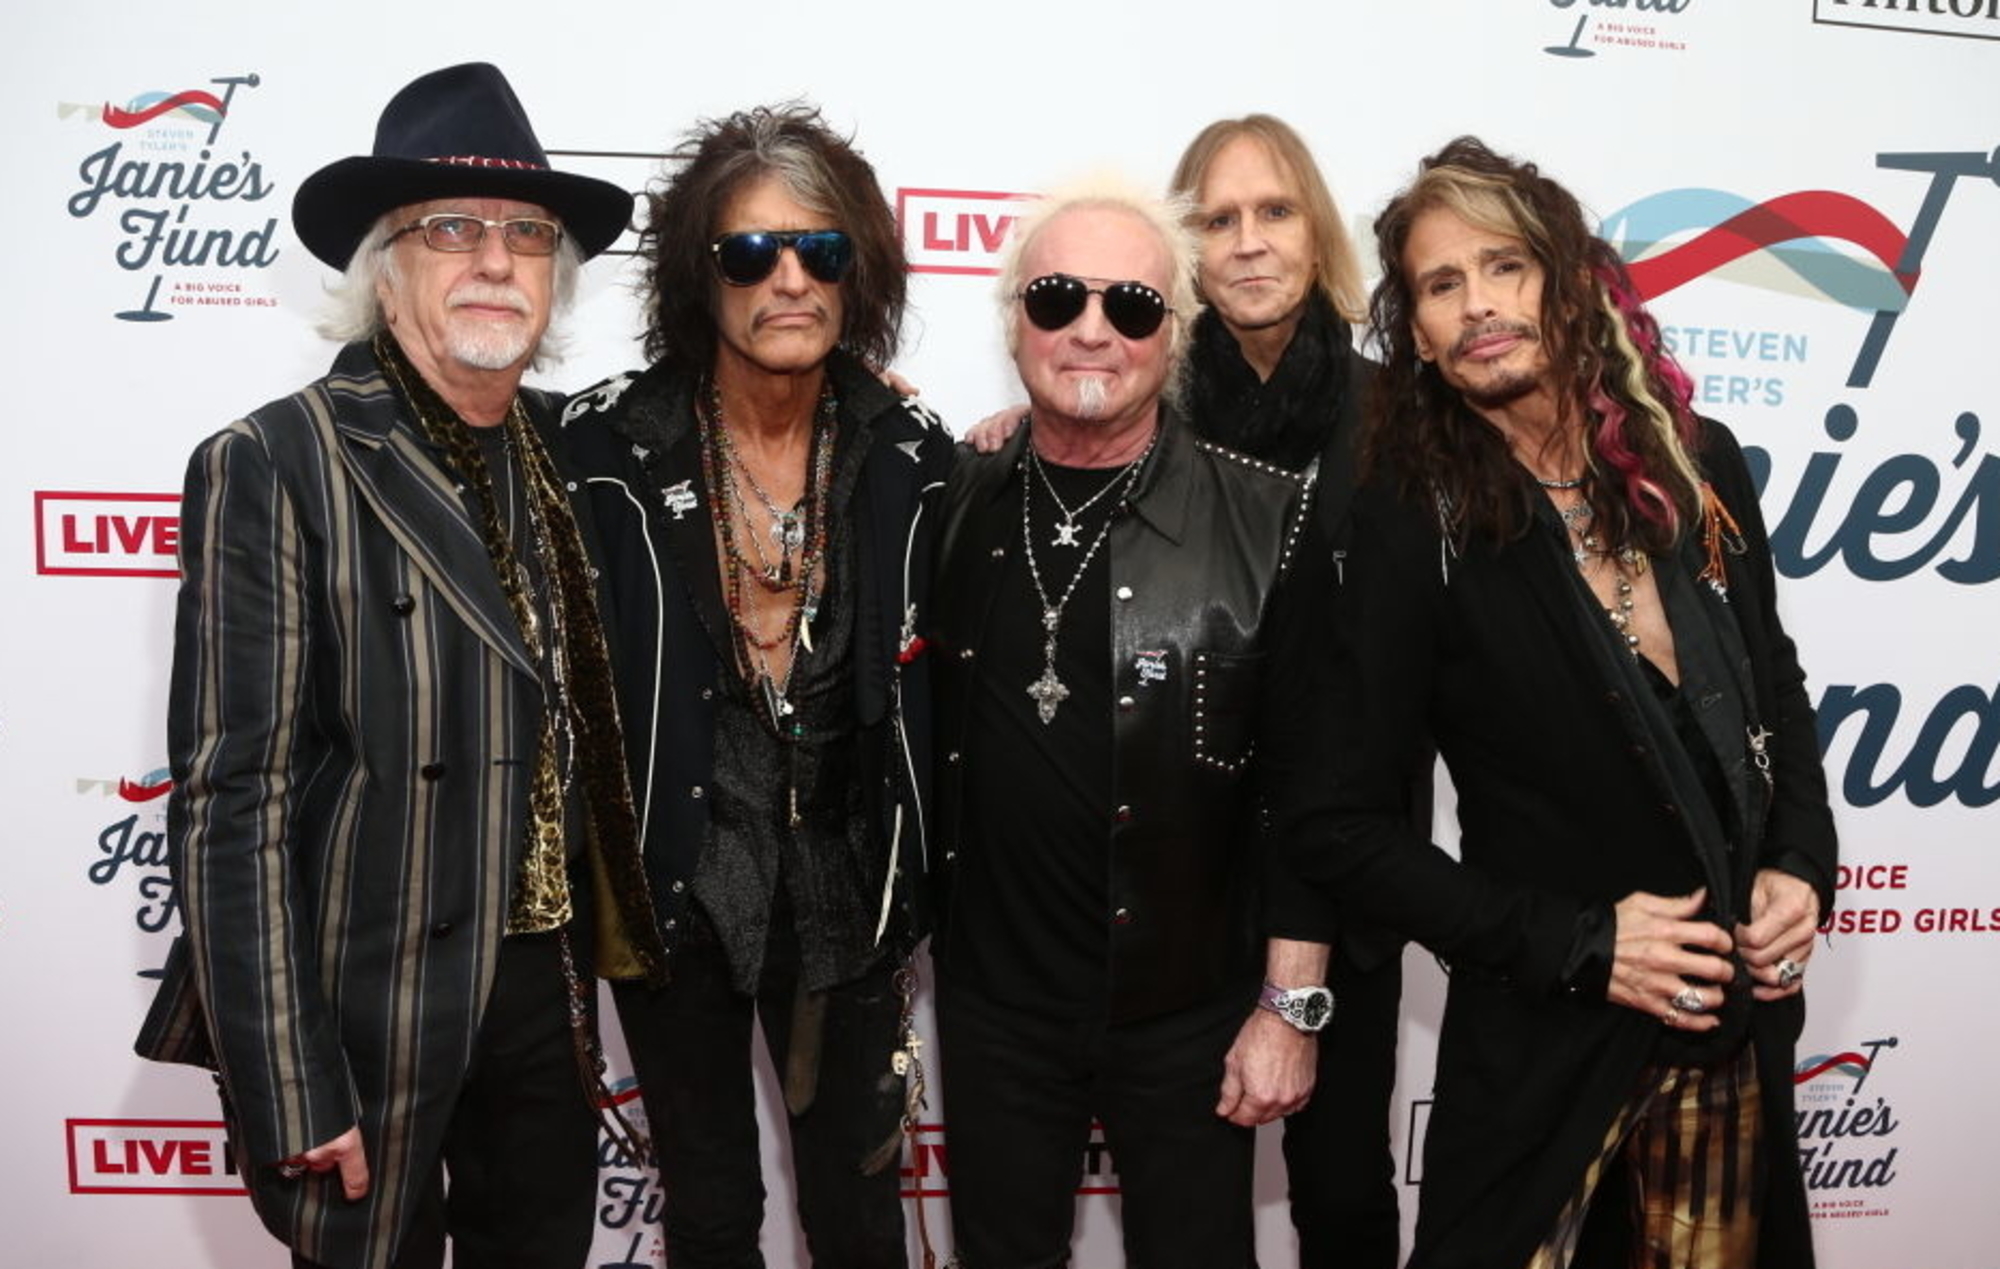 After 50 Years in Music, Aerosmith Announces Final Farewell Tour